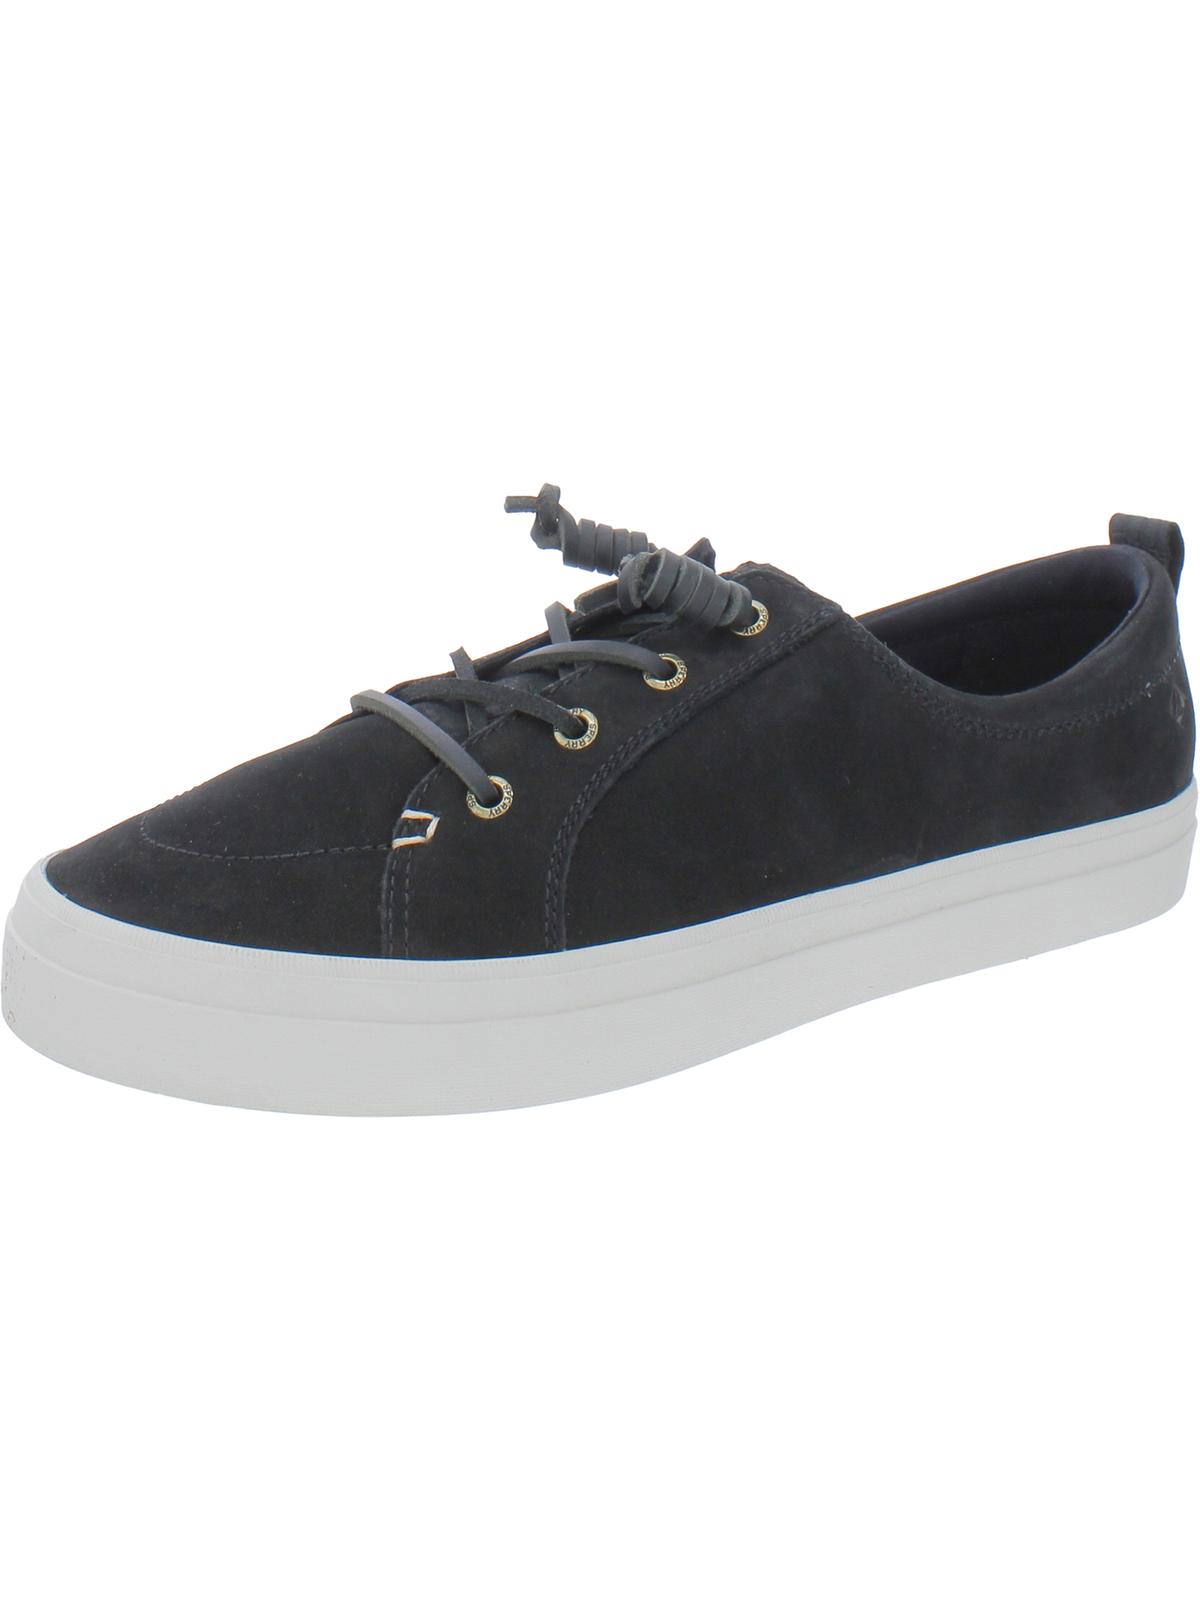 SPERRY Crest Vibe  Womens Suede Cusioned Footbed Boat Shoes